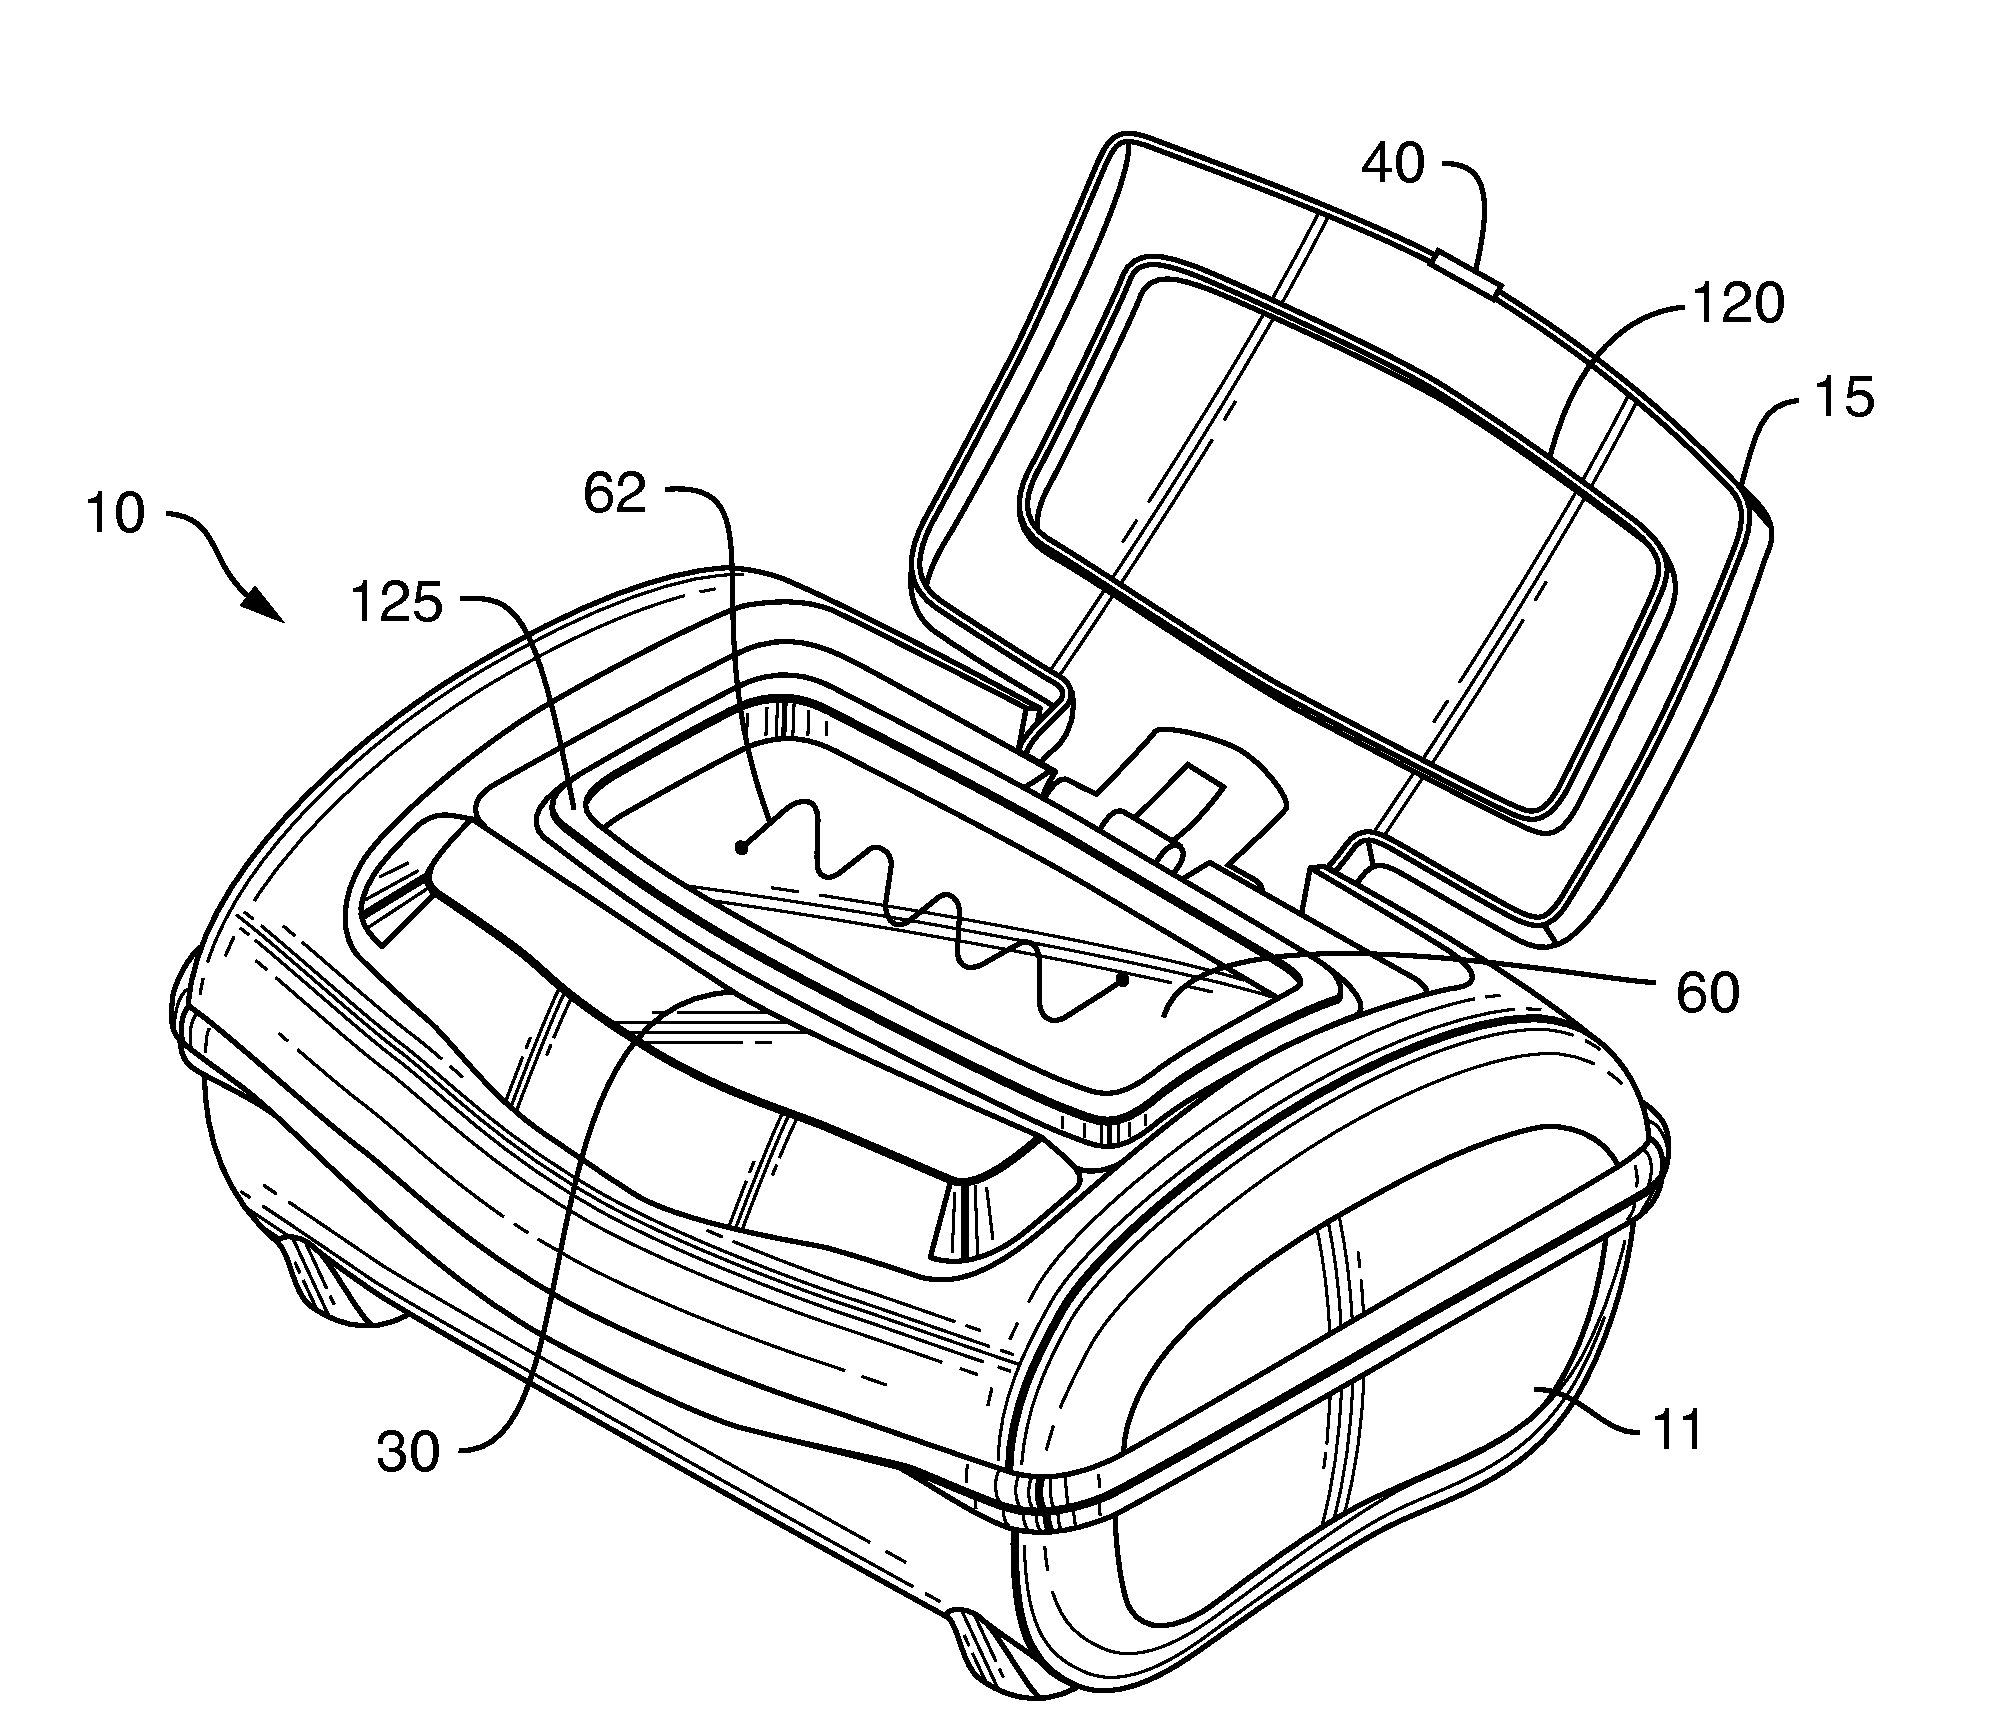 Dispenser With a Wide Lid-Activation Button Having a Stabilizing Rib